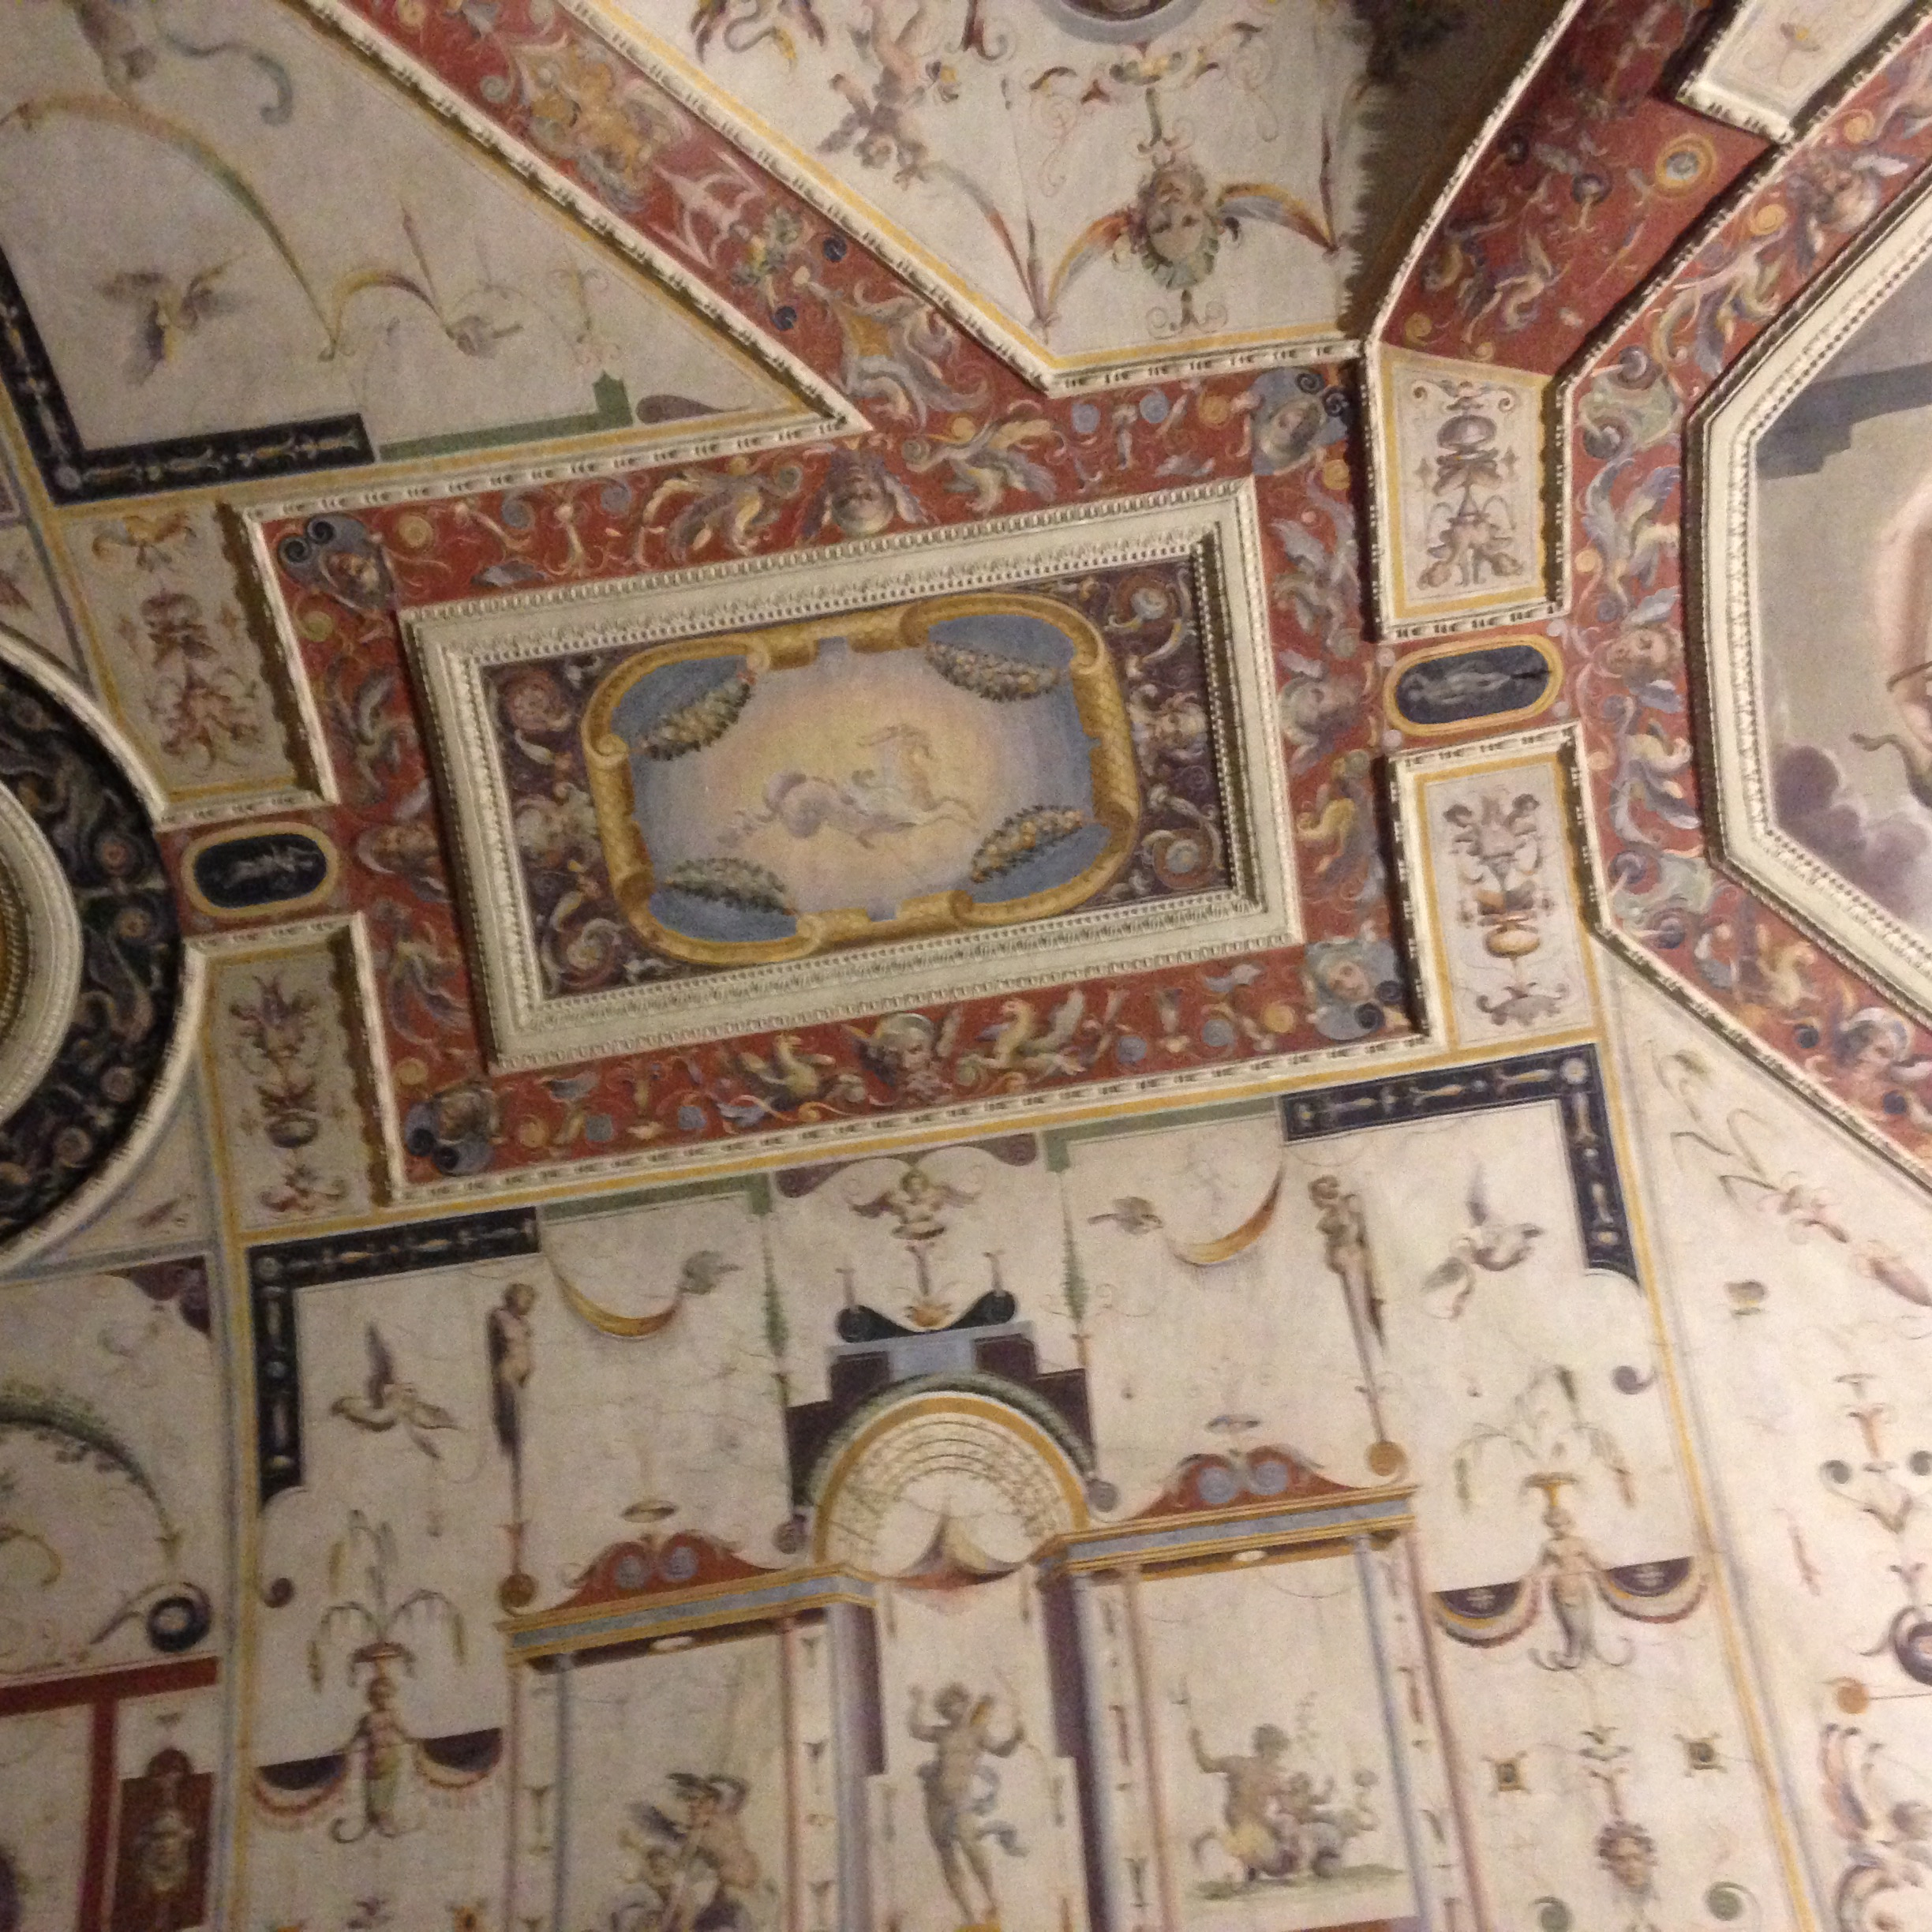 Florentine Ceiling in the Uffizi Gallery with "grotesques"